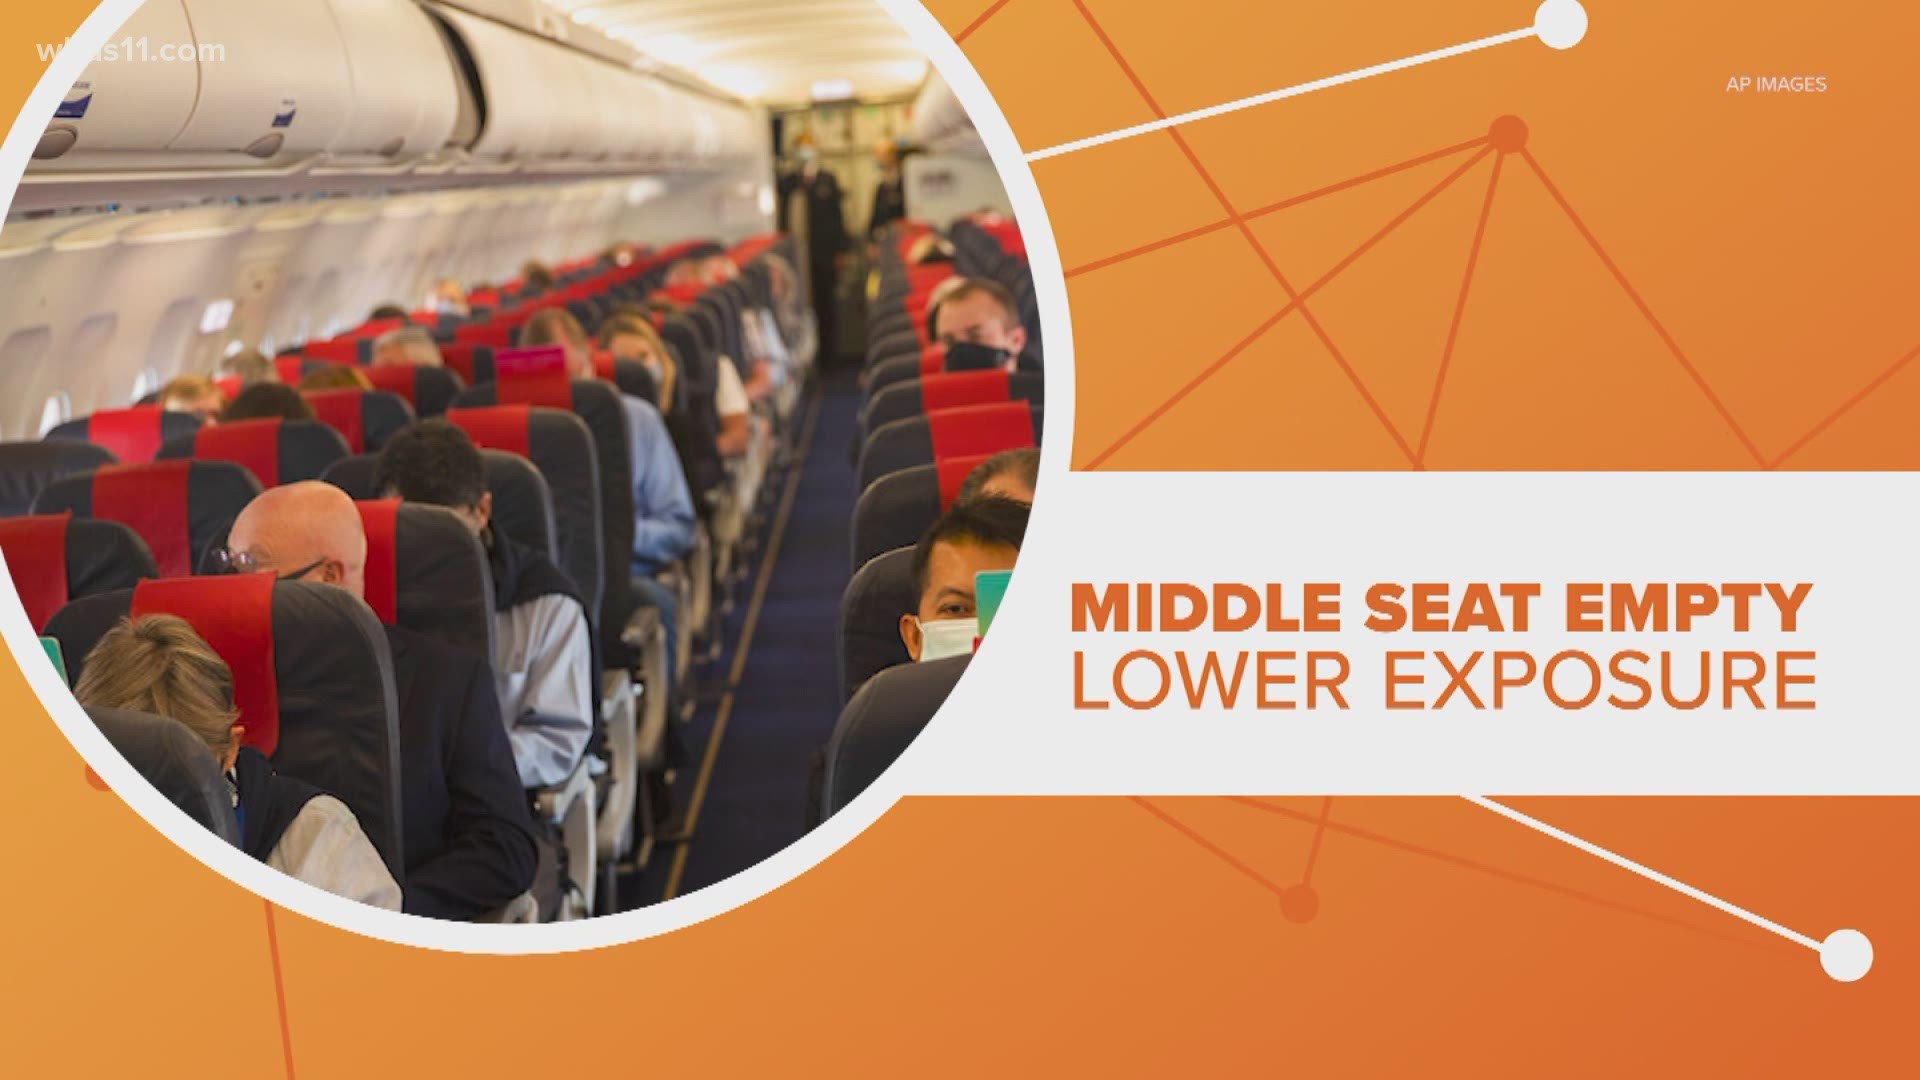 Research released by the CDC found that leaving the middle seat open on flights could reduce the risk of exposure to covid-19 by 23 to 57 percent.